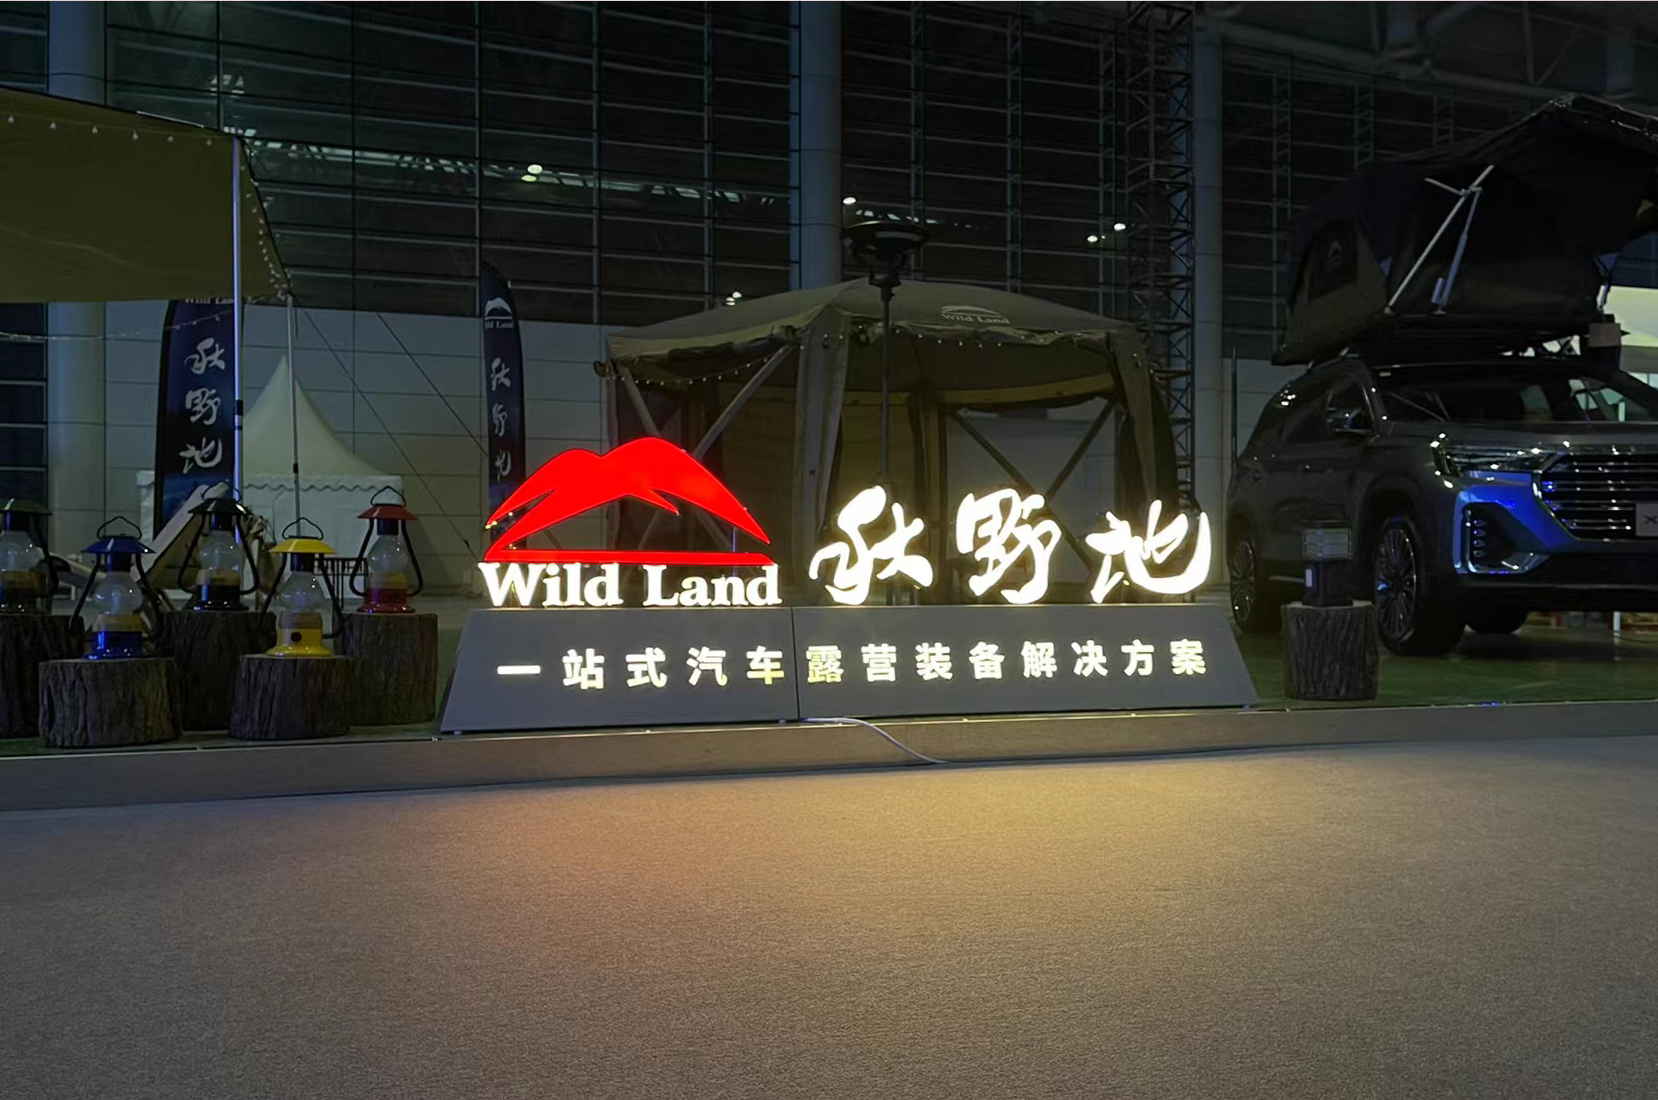 Wild Land: The 2nd Travel + Conference of JETOUR Auto came to a successful conclusion